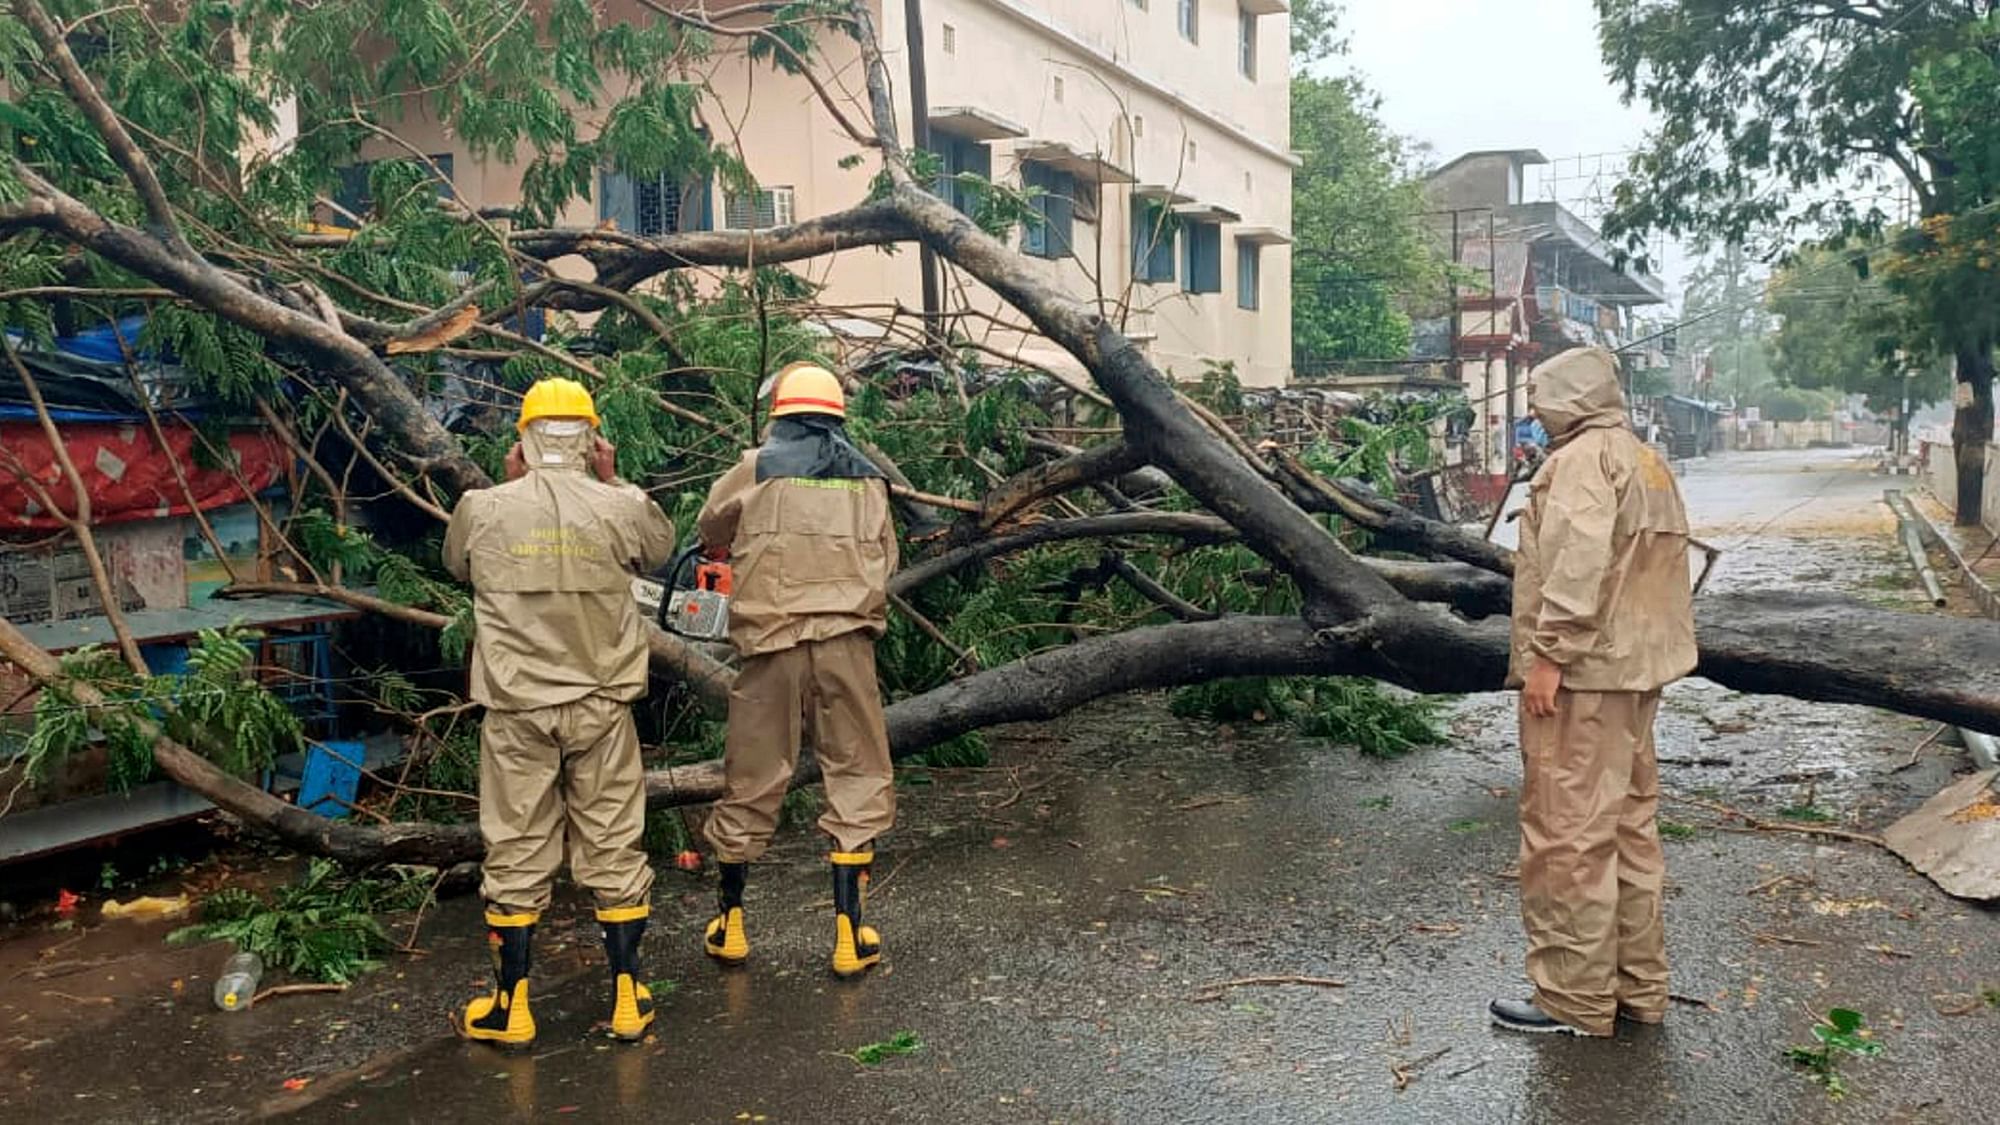 Road blockage being cleared after a tree uprooted due to heavy winds and rain ahead of cyclone Amphan landfall, near R&B office in Bhadrak, Wednesday, May 20.